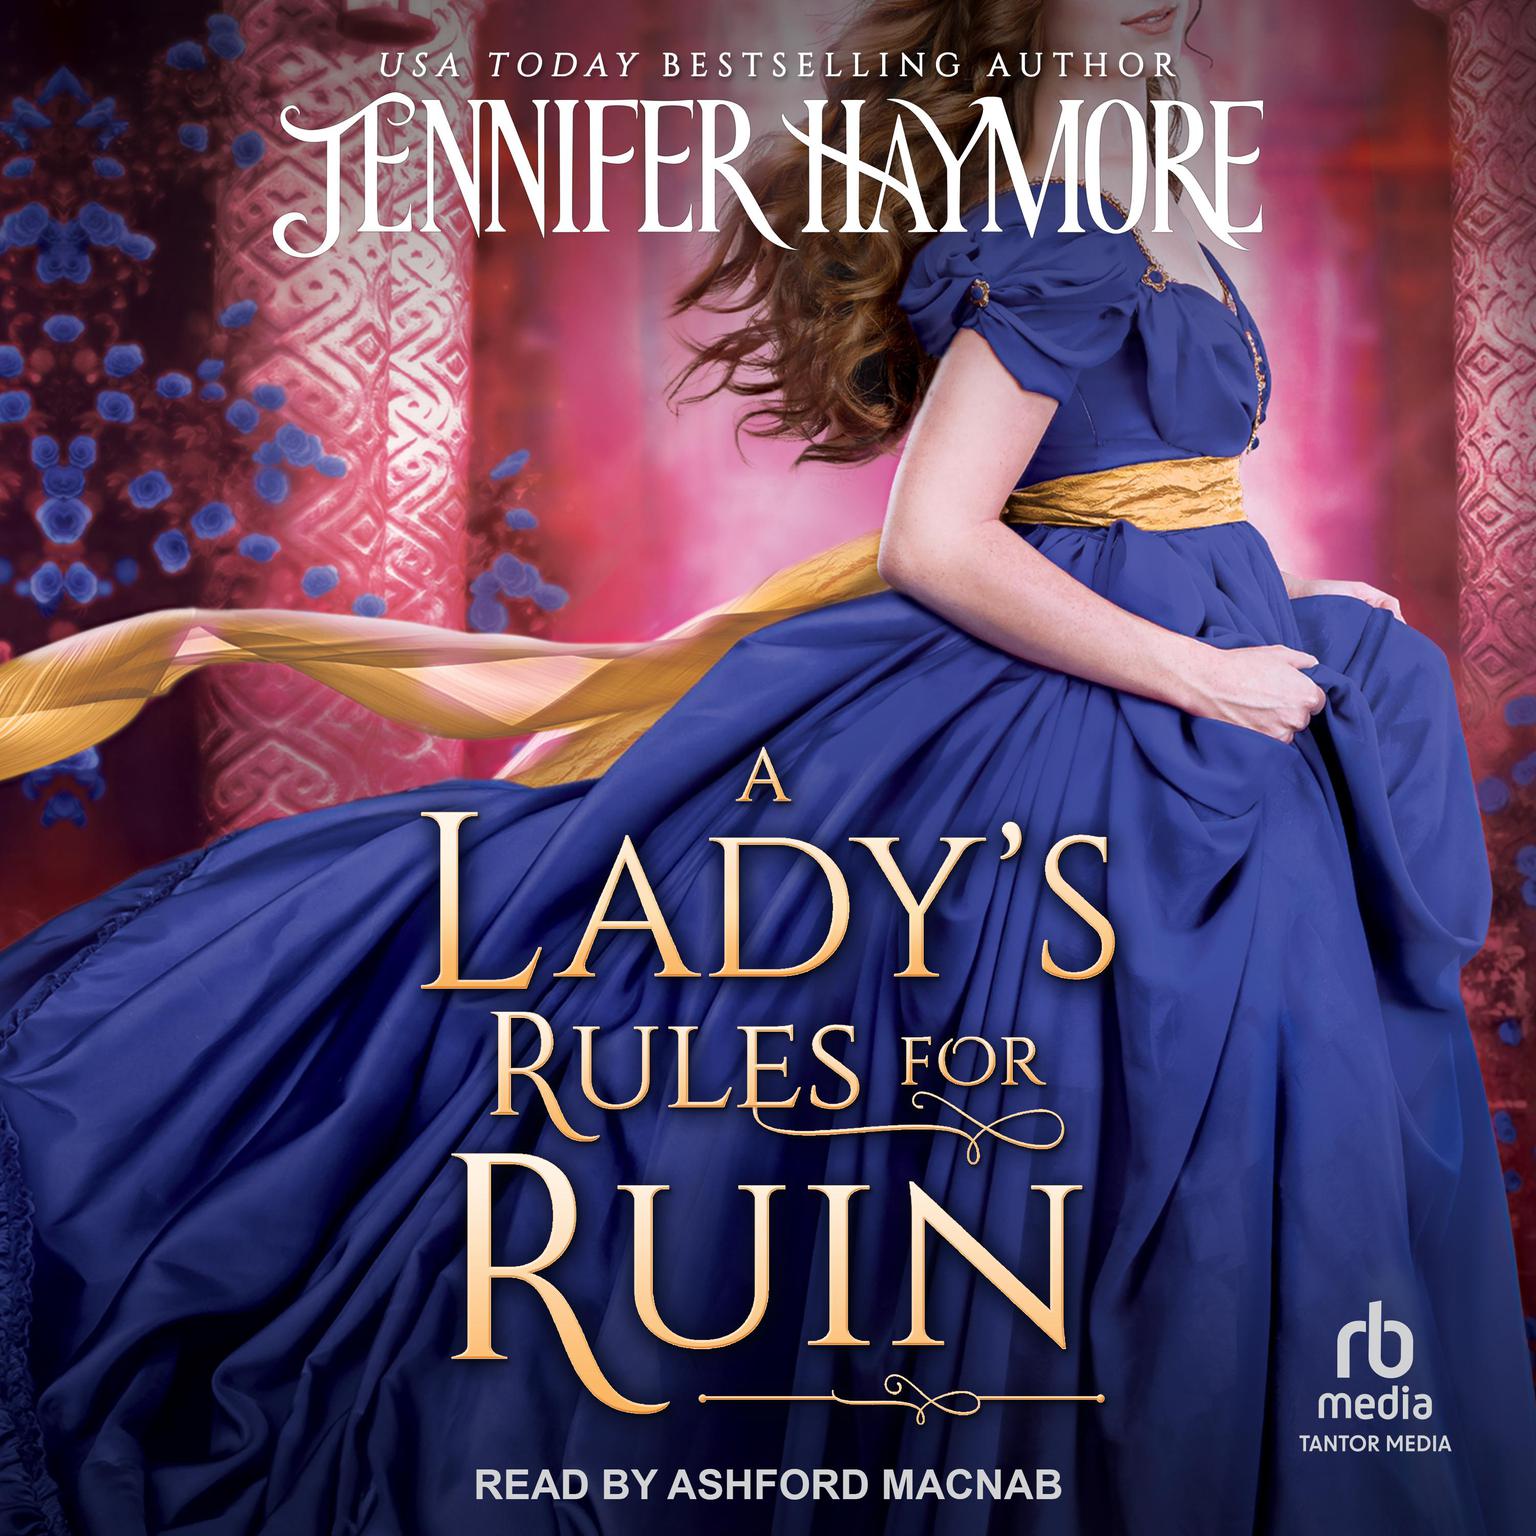 A Ladys Rules for Ruin Audiobook, by Jennifer Haymore